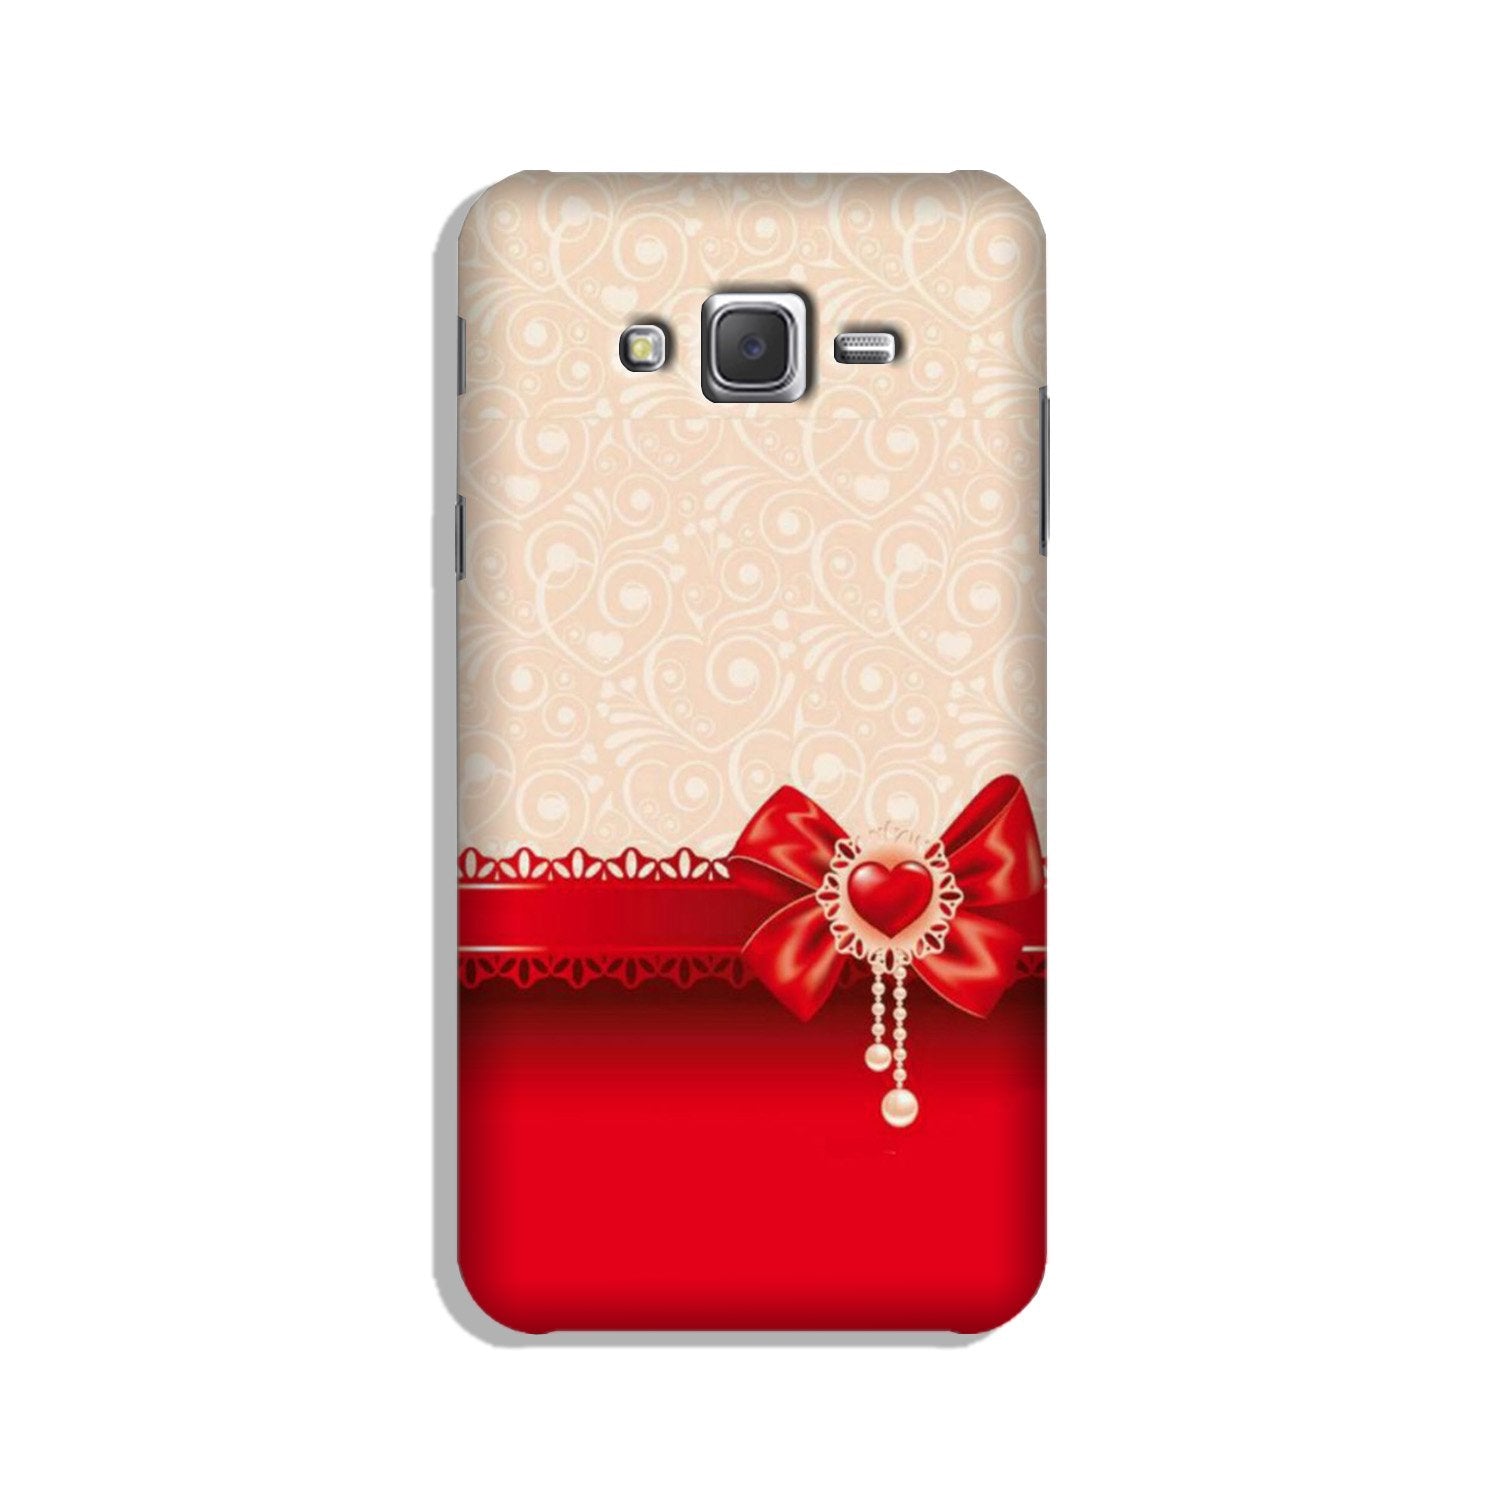 Gift Wrap3 Case for Galaxy J7 (2015)